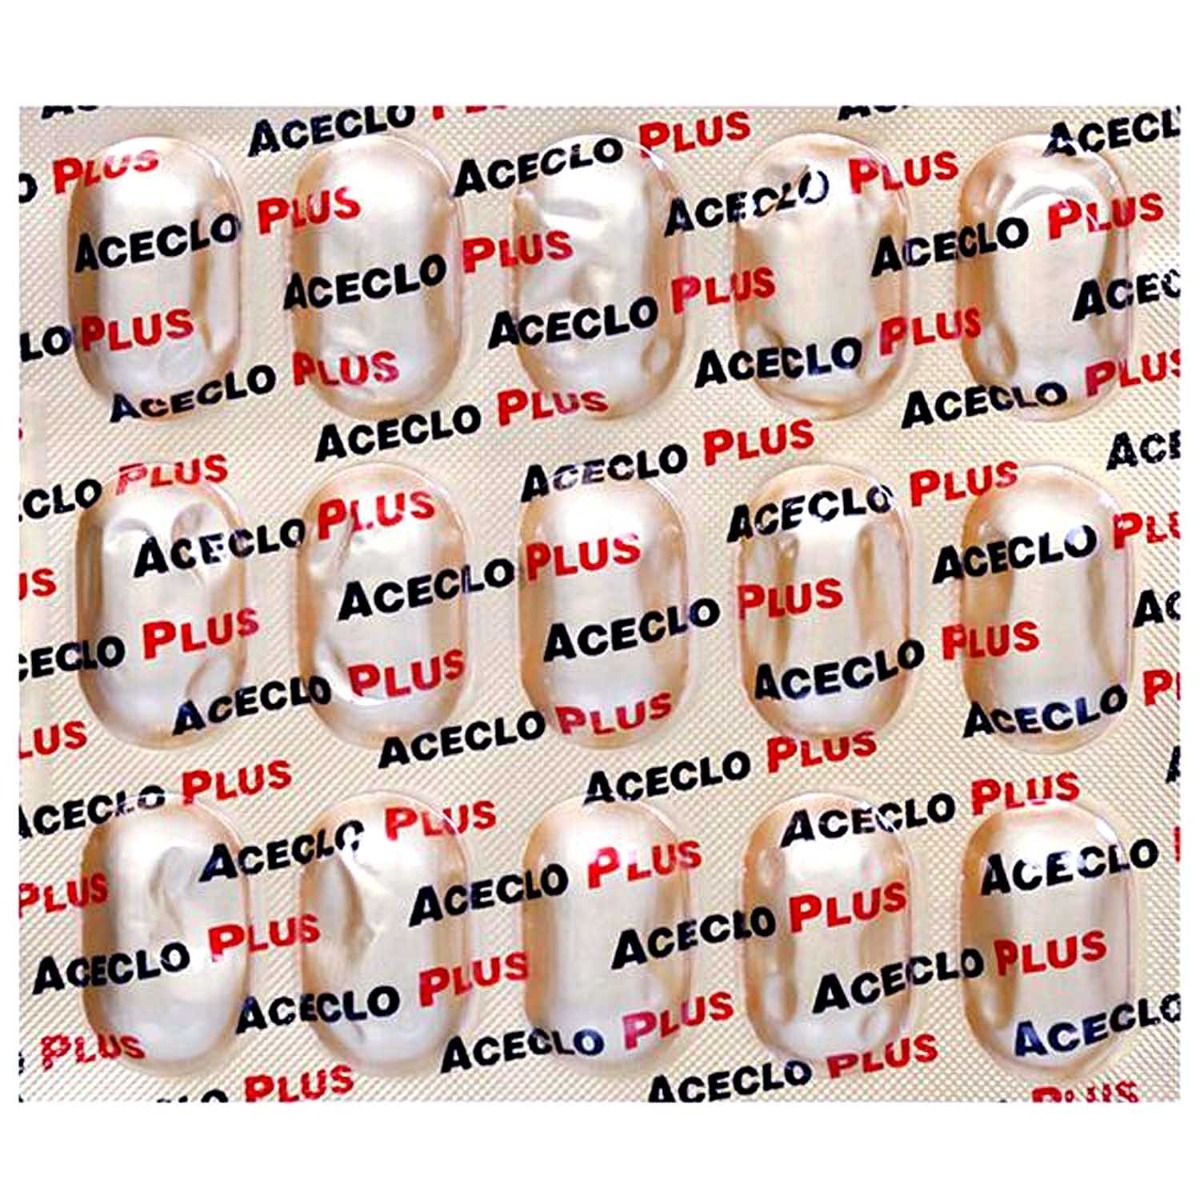 Aceclo Plus Tablet 15 S Price Uses Side Effects Composition Apollo Pharmacy